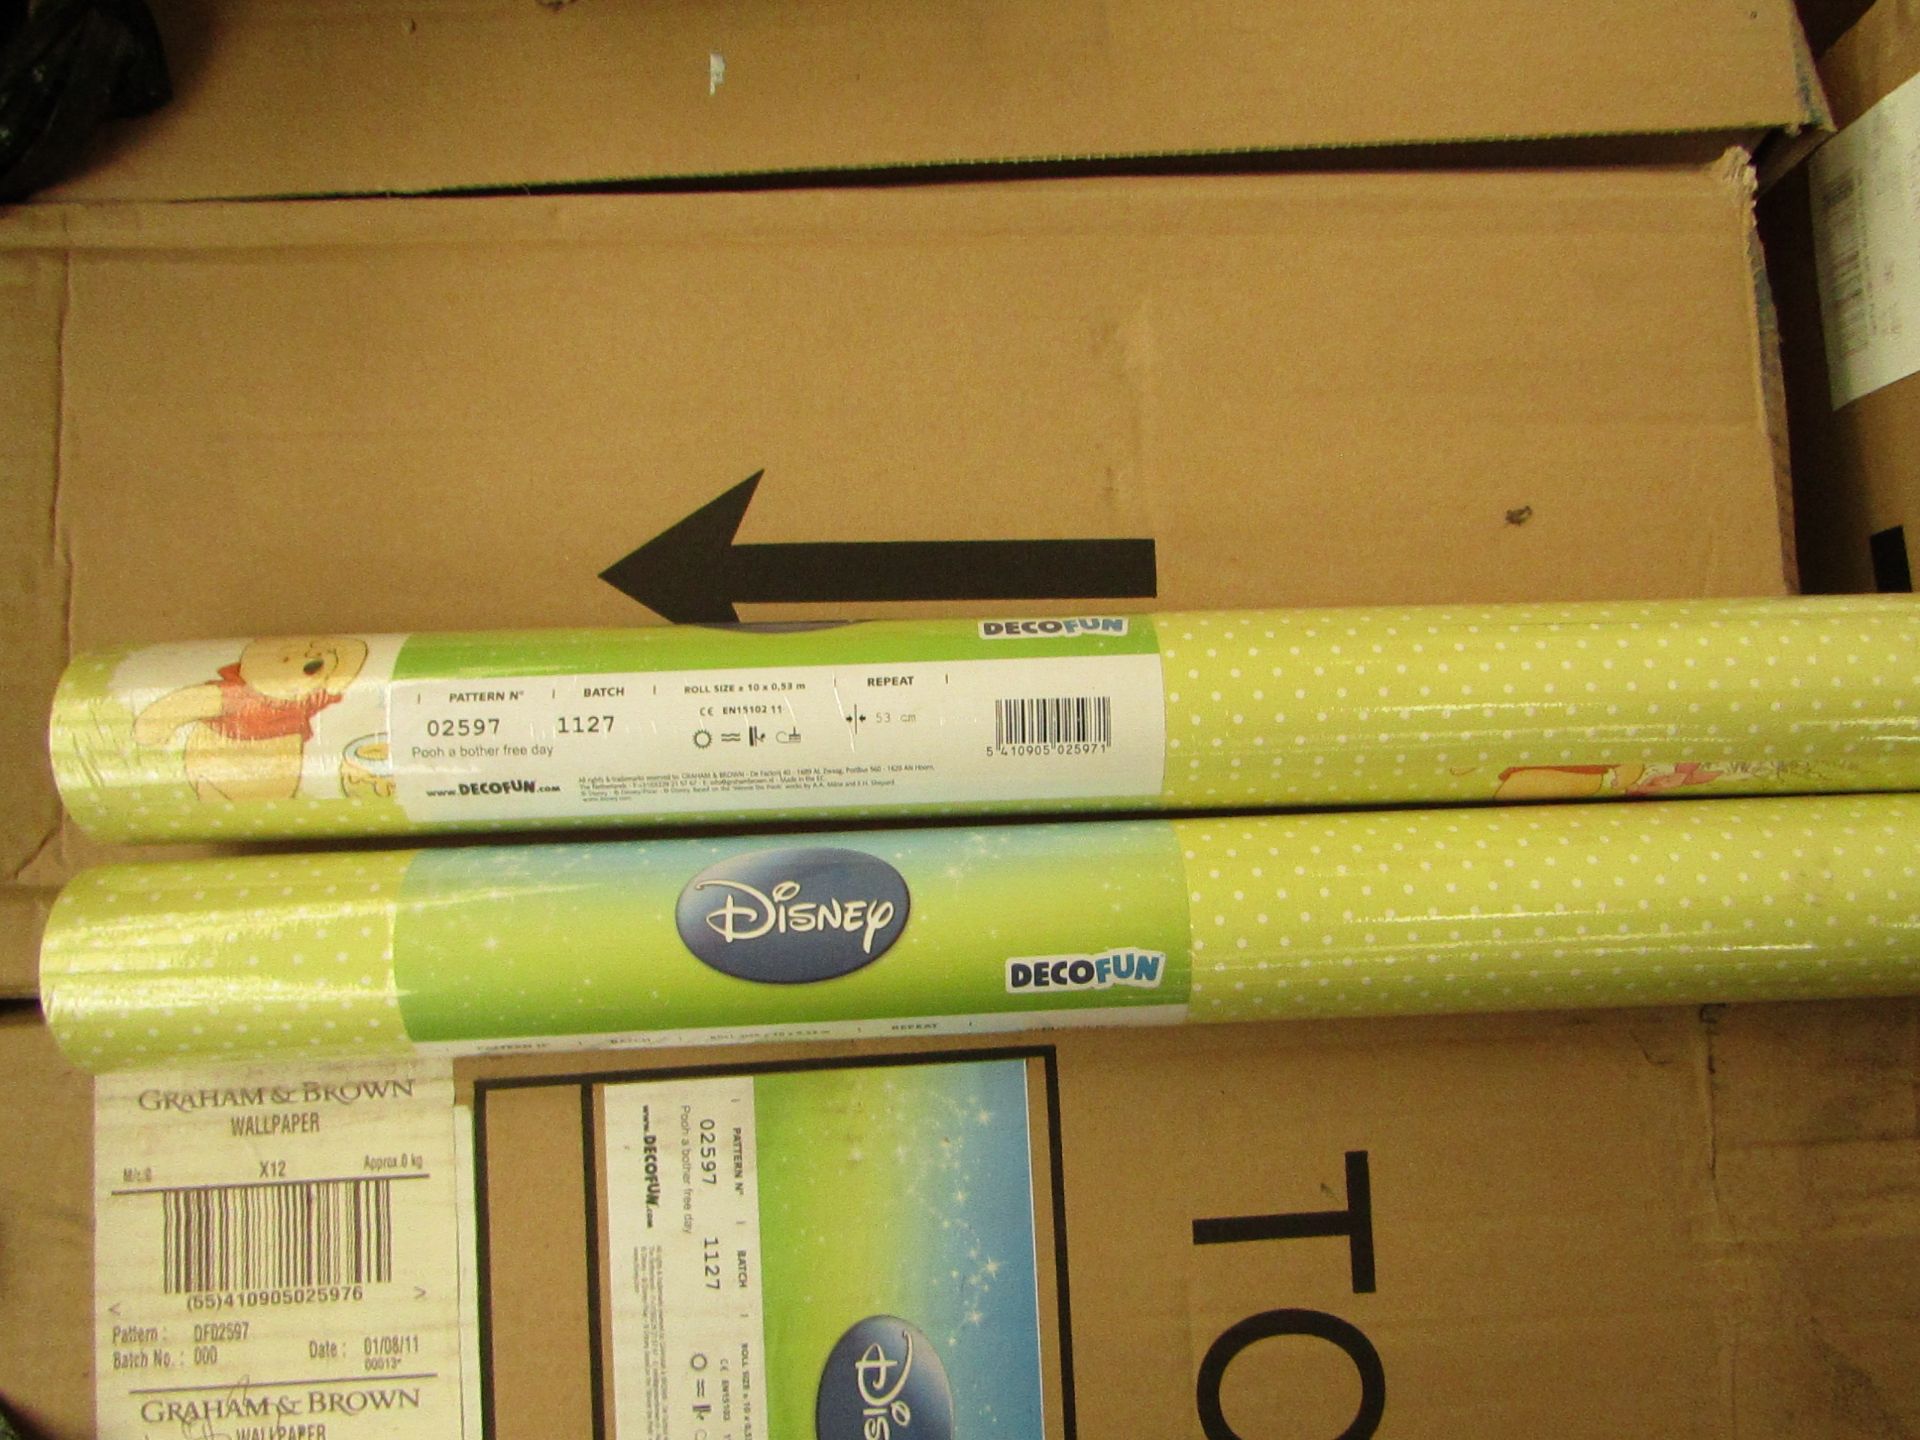 Box of 12 Rolls of Winnie The pooh Wallpaper. Packaged